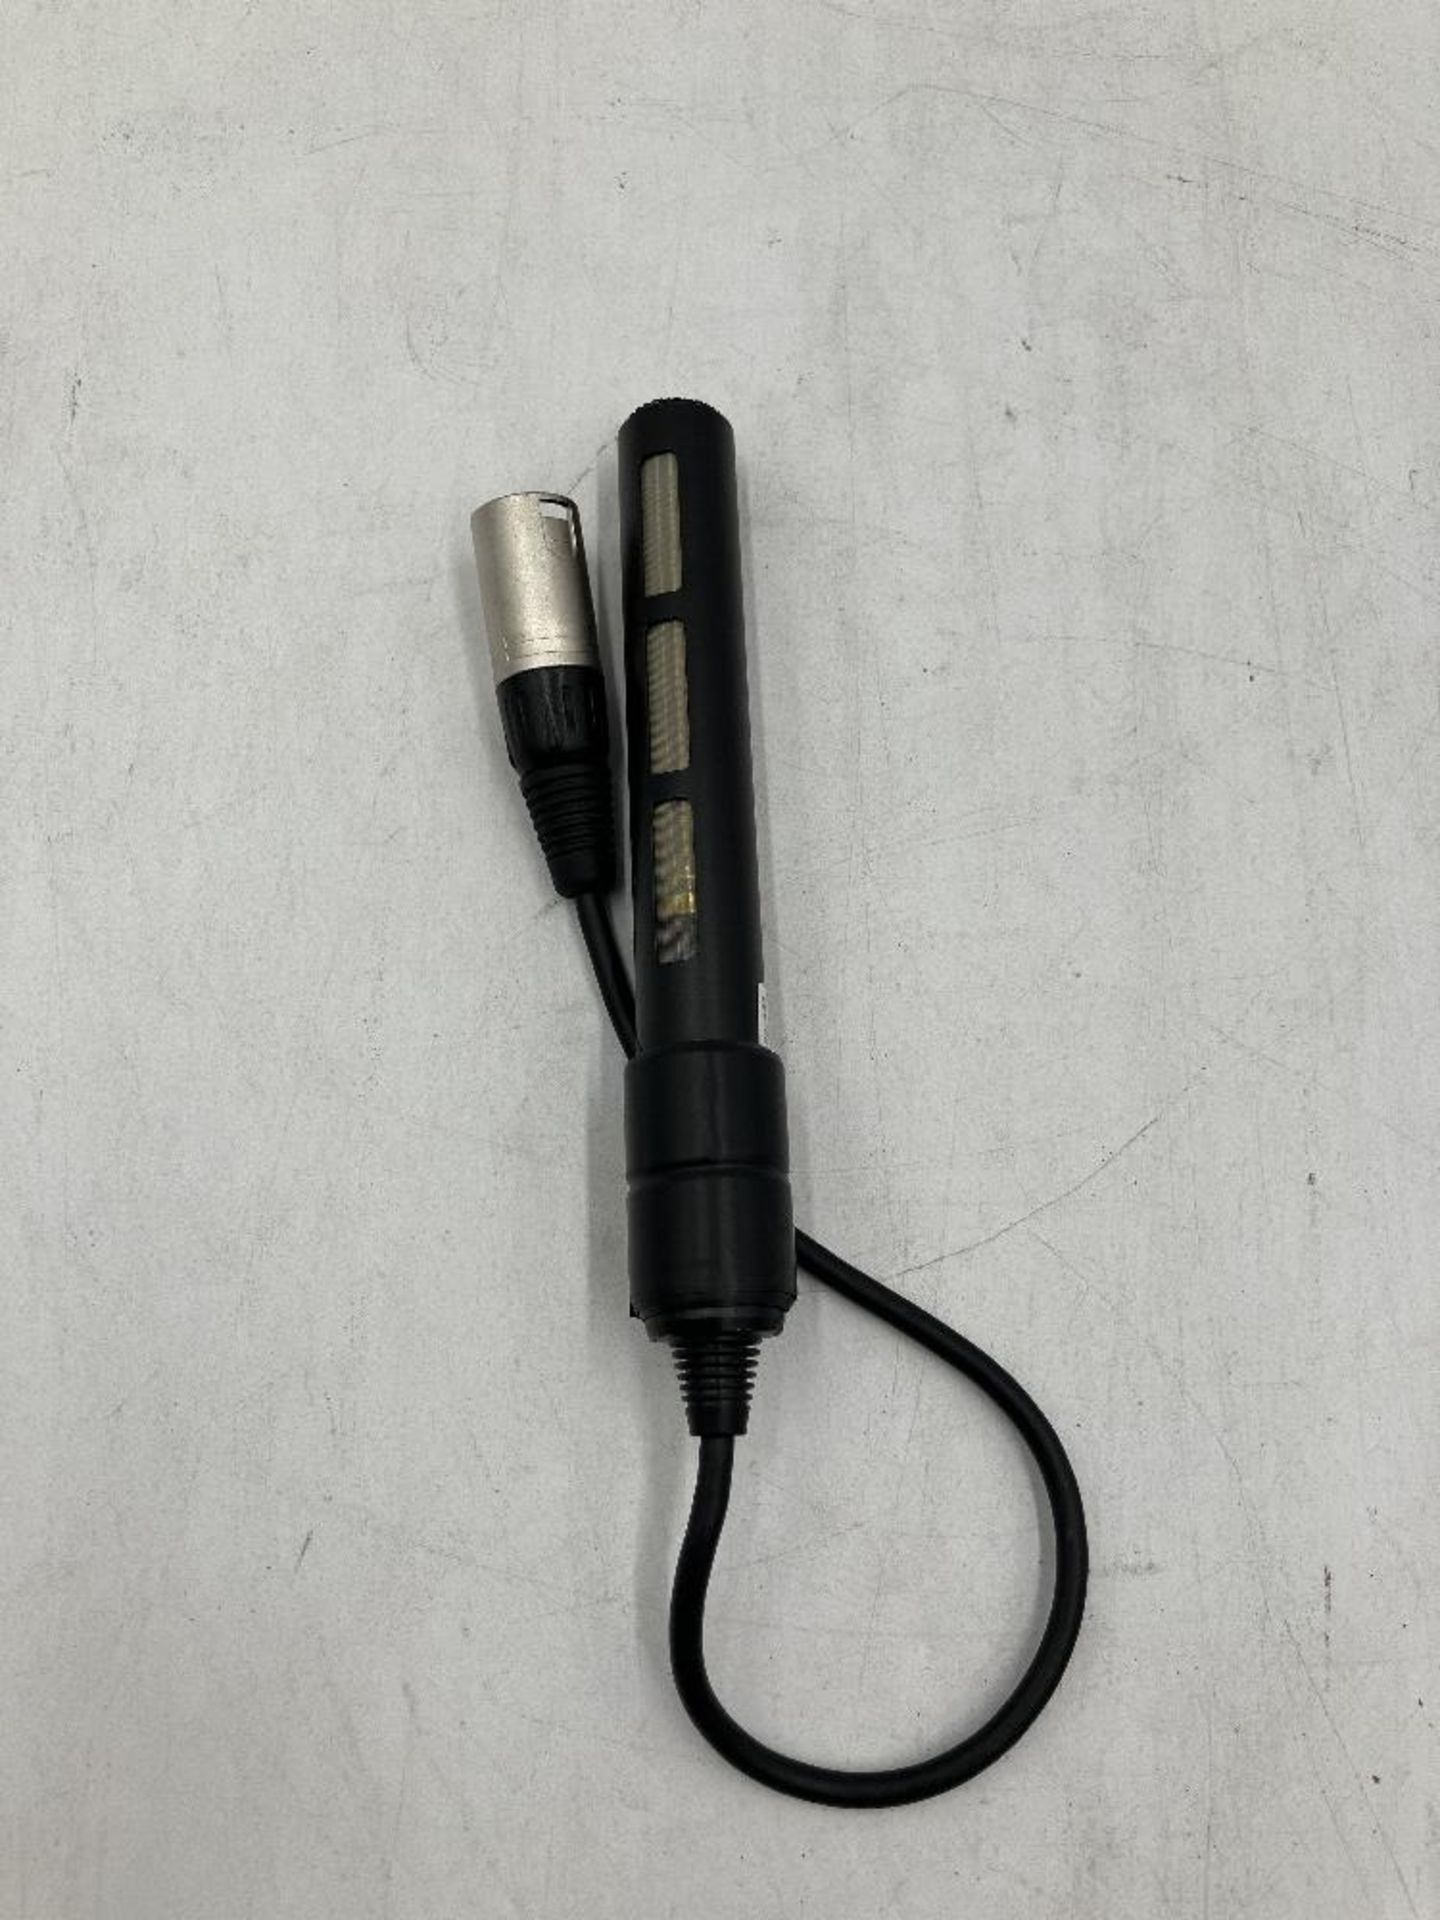 Sony Microphone - Image 3 of 4